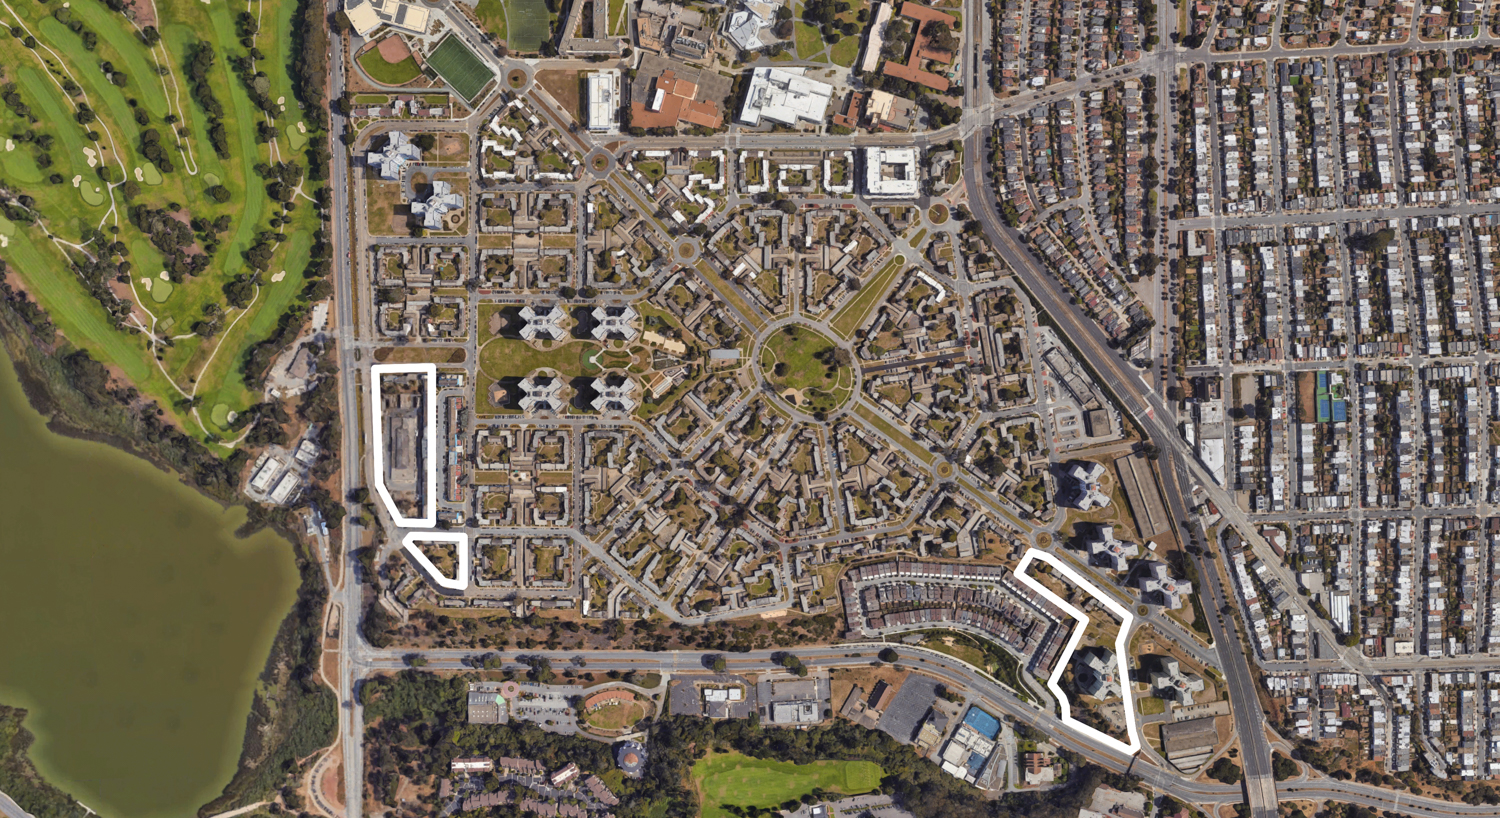 Existing site. Properties outlined, from top left to bottom right: Block 3W, Block 4, and Block 21S, image via Google Satellite approximately outlined by YIMBY